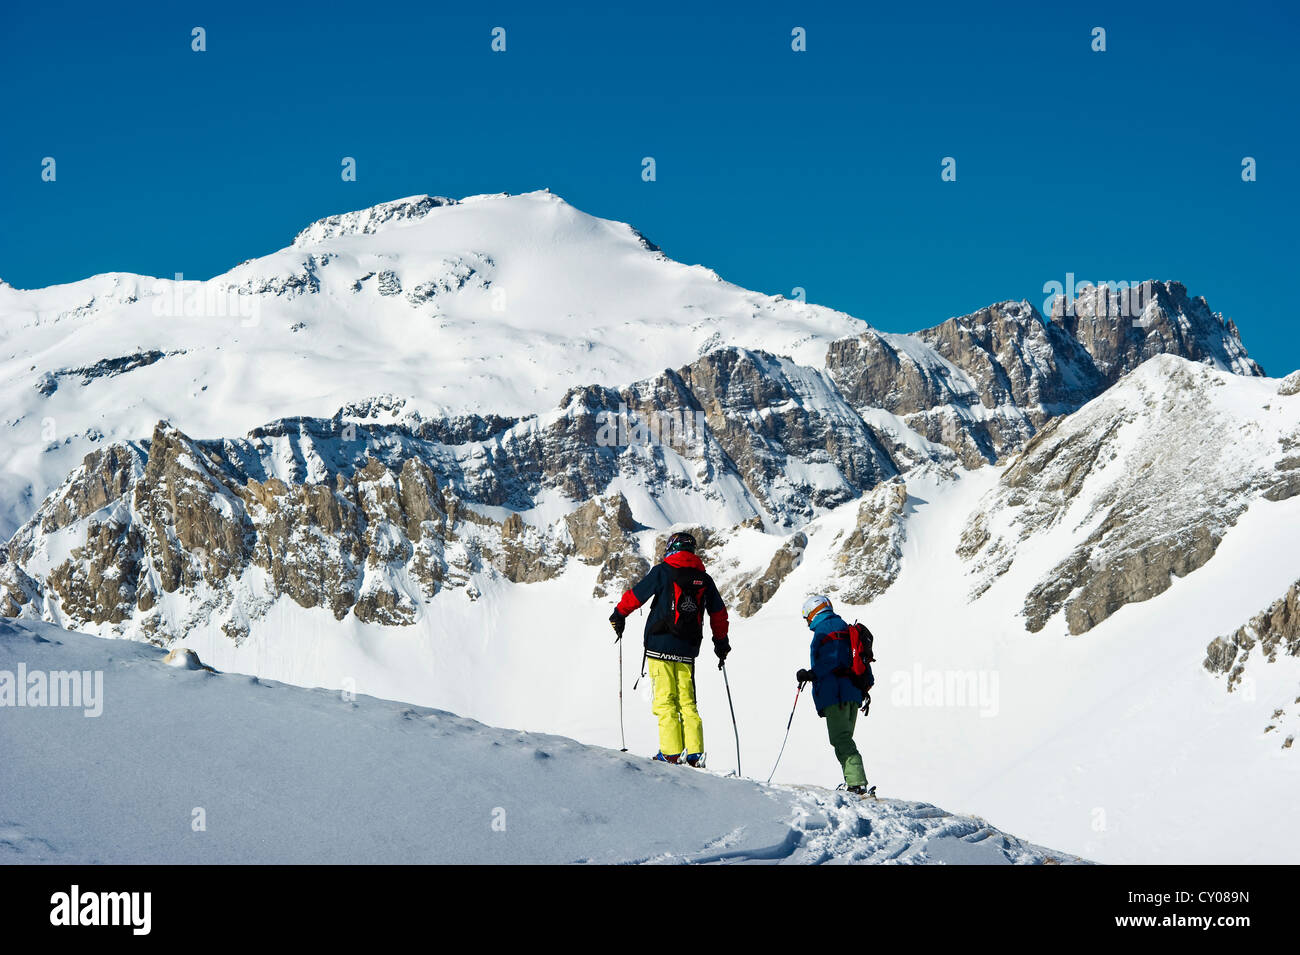 Cross-country skiers, Tignes, Val d'Isere, Savoie, Alps, France, Europe Stock Photo